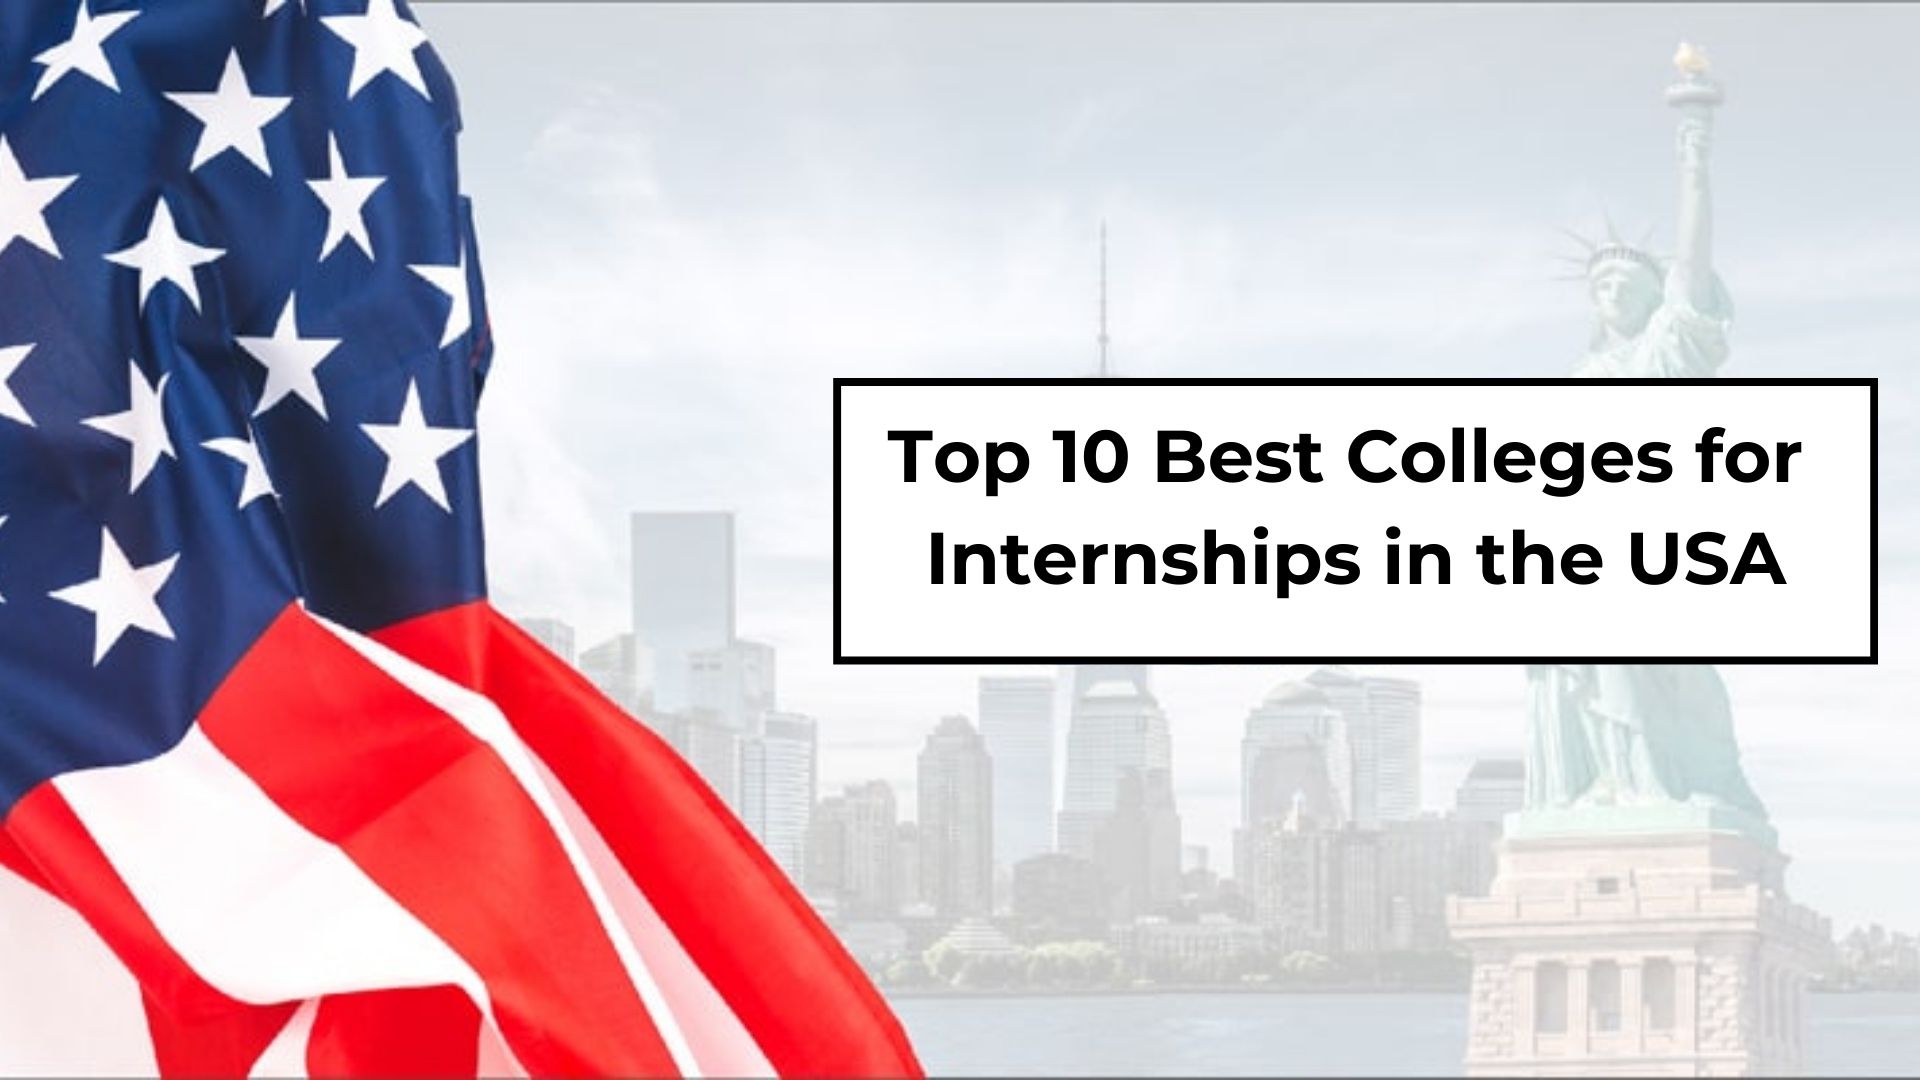 Top 10 Best Colleges for Internships in the USA